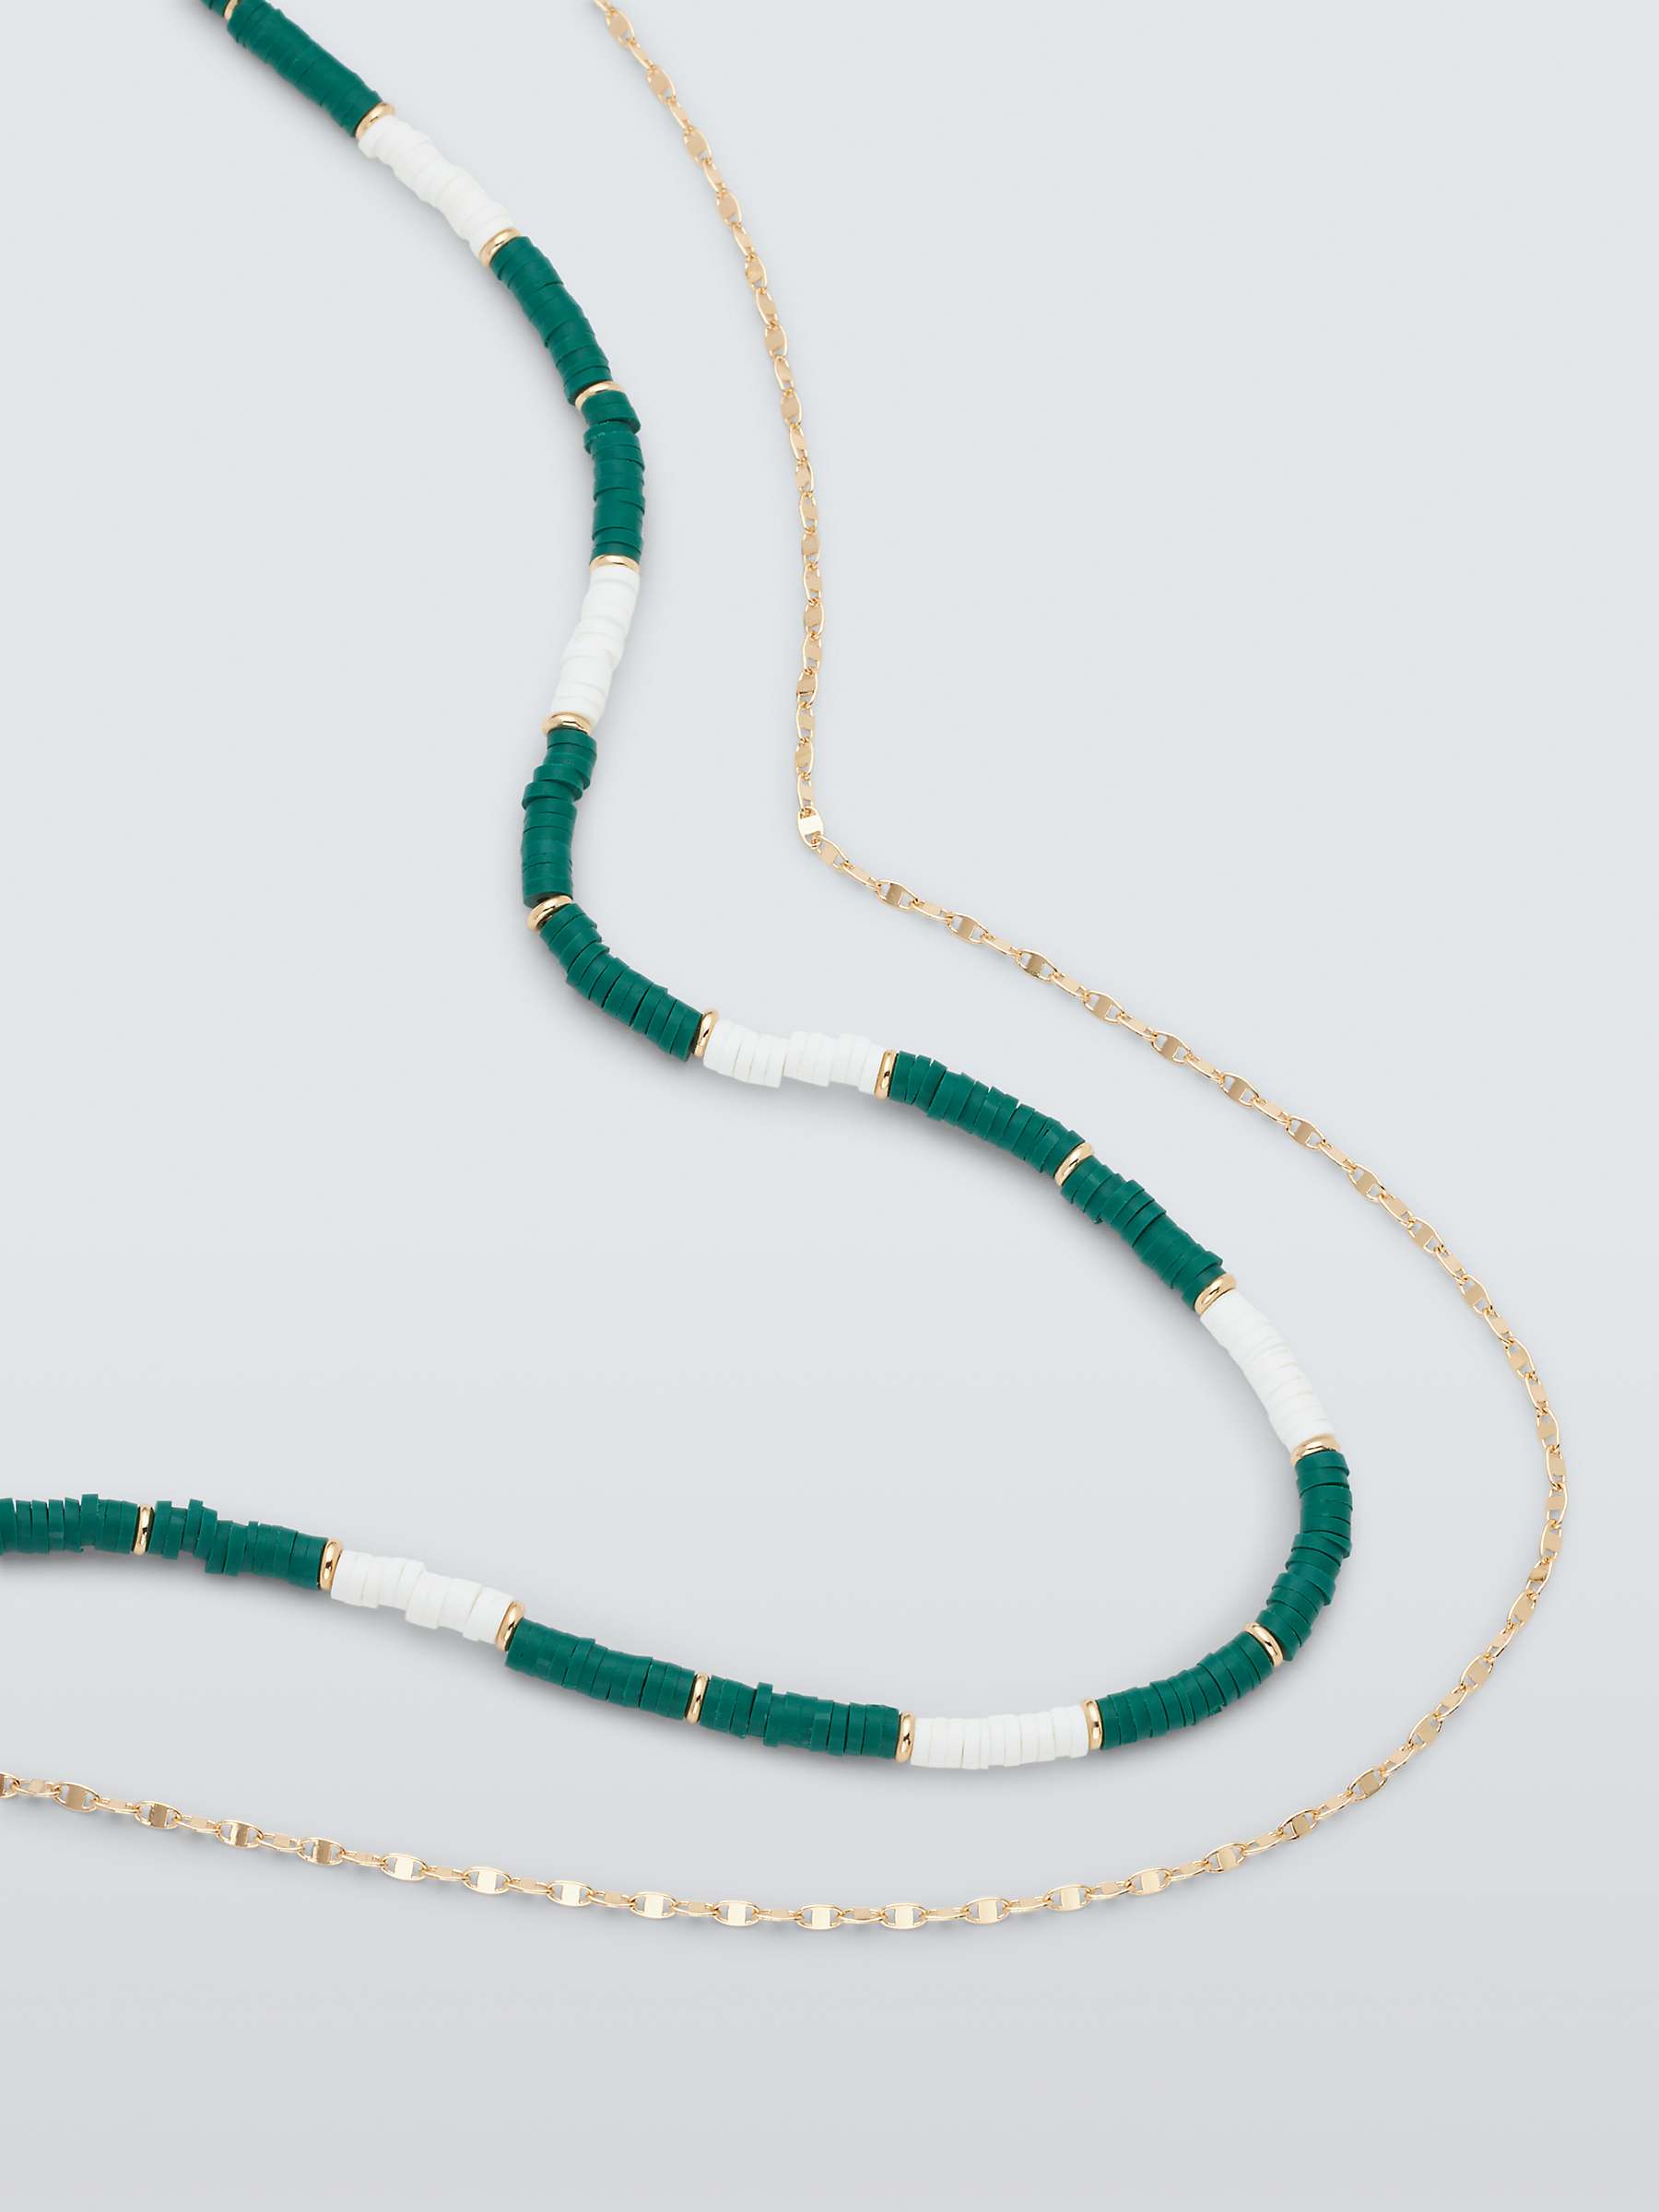 Buy John Lewis Multi Disc Necklace, Pack of 2, Green/White Online at johnlewis.com